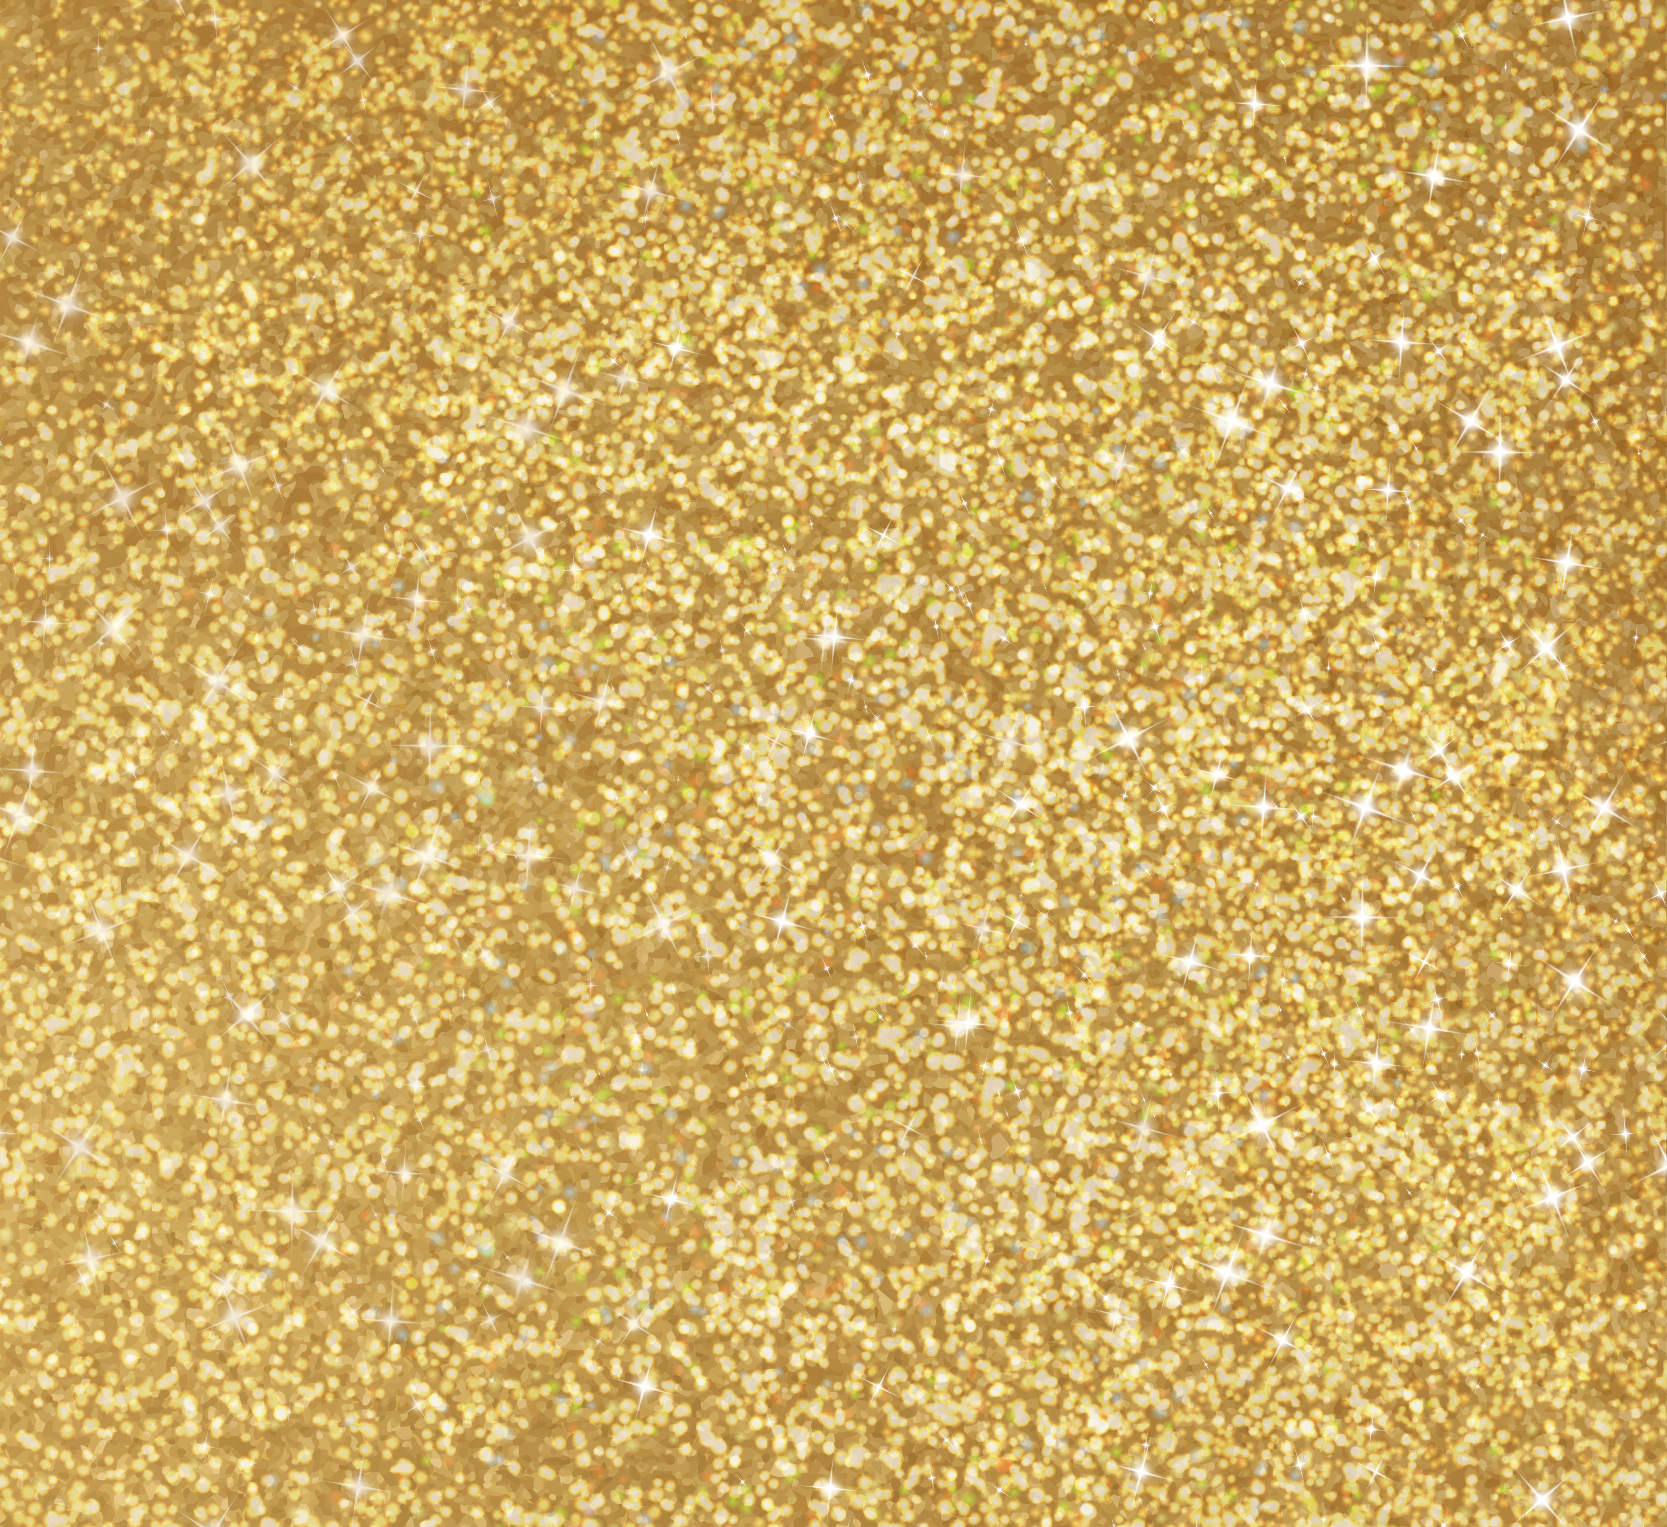 FREE Gold Glitter Background in PSD